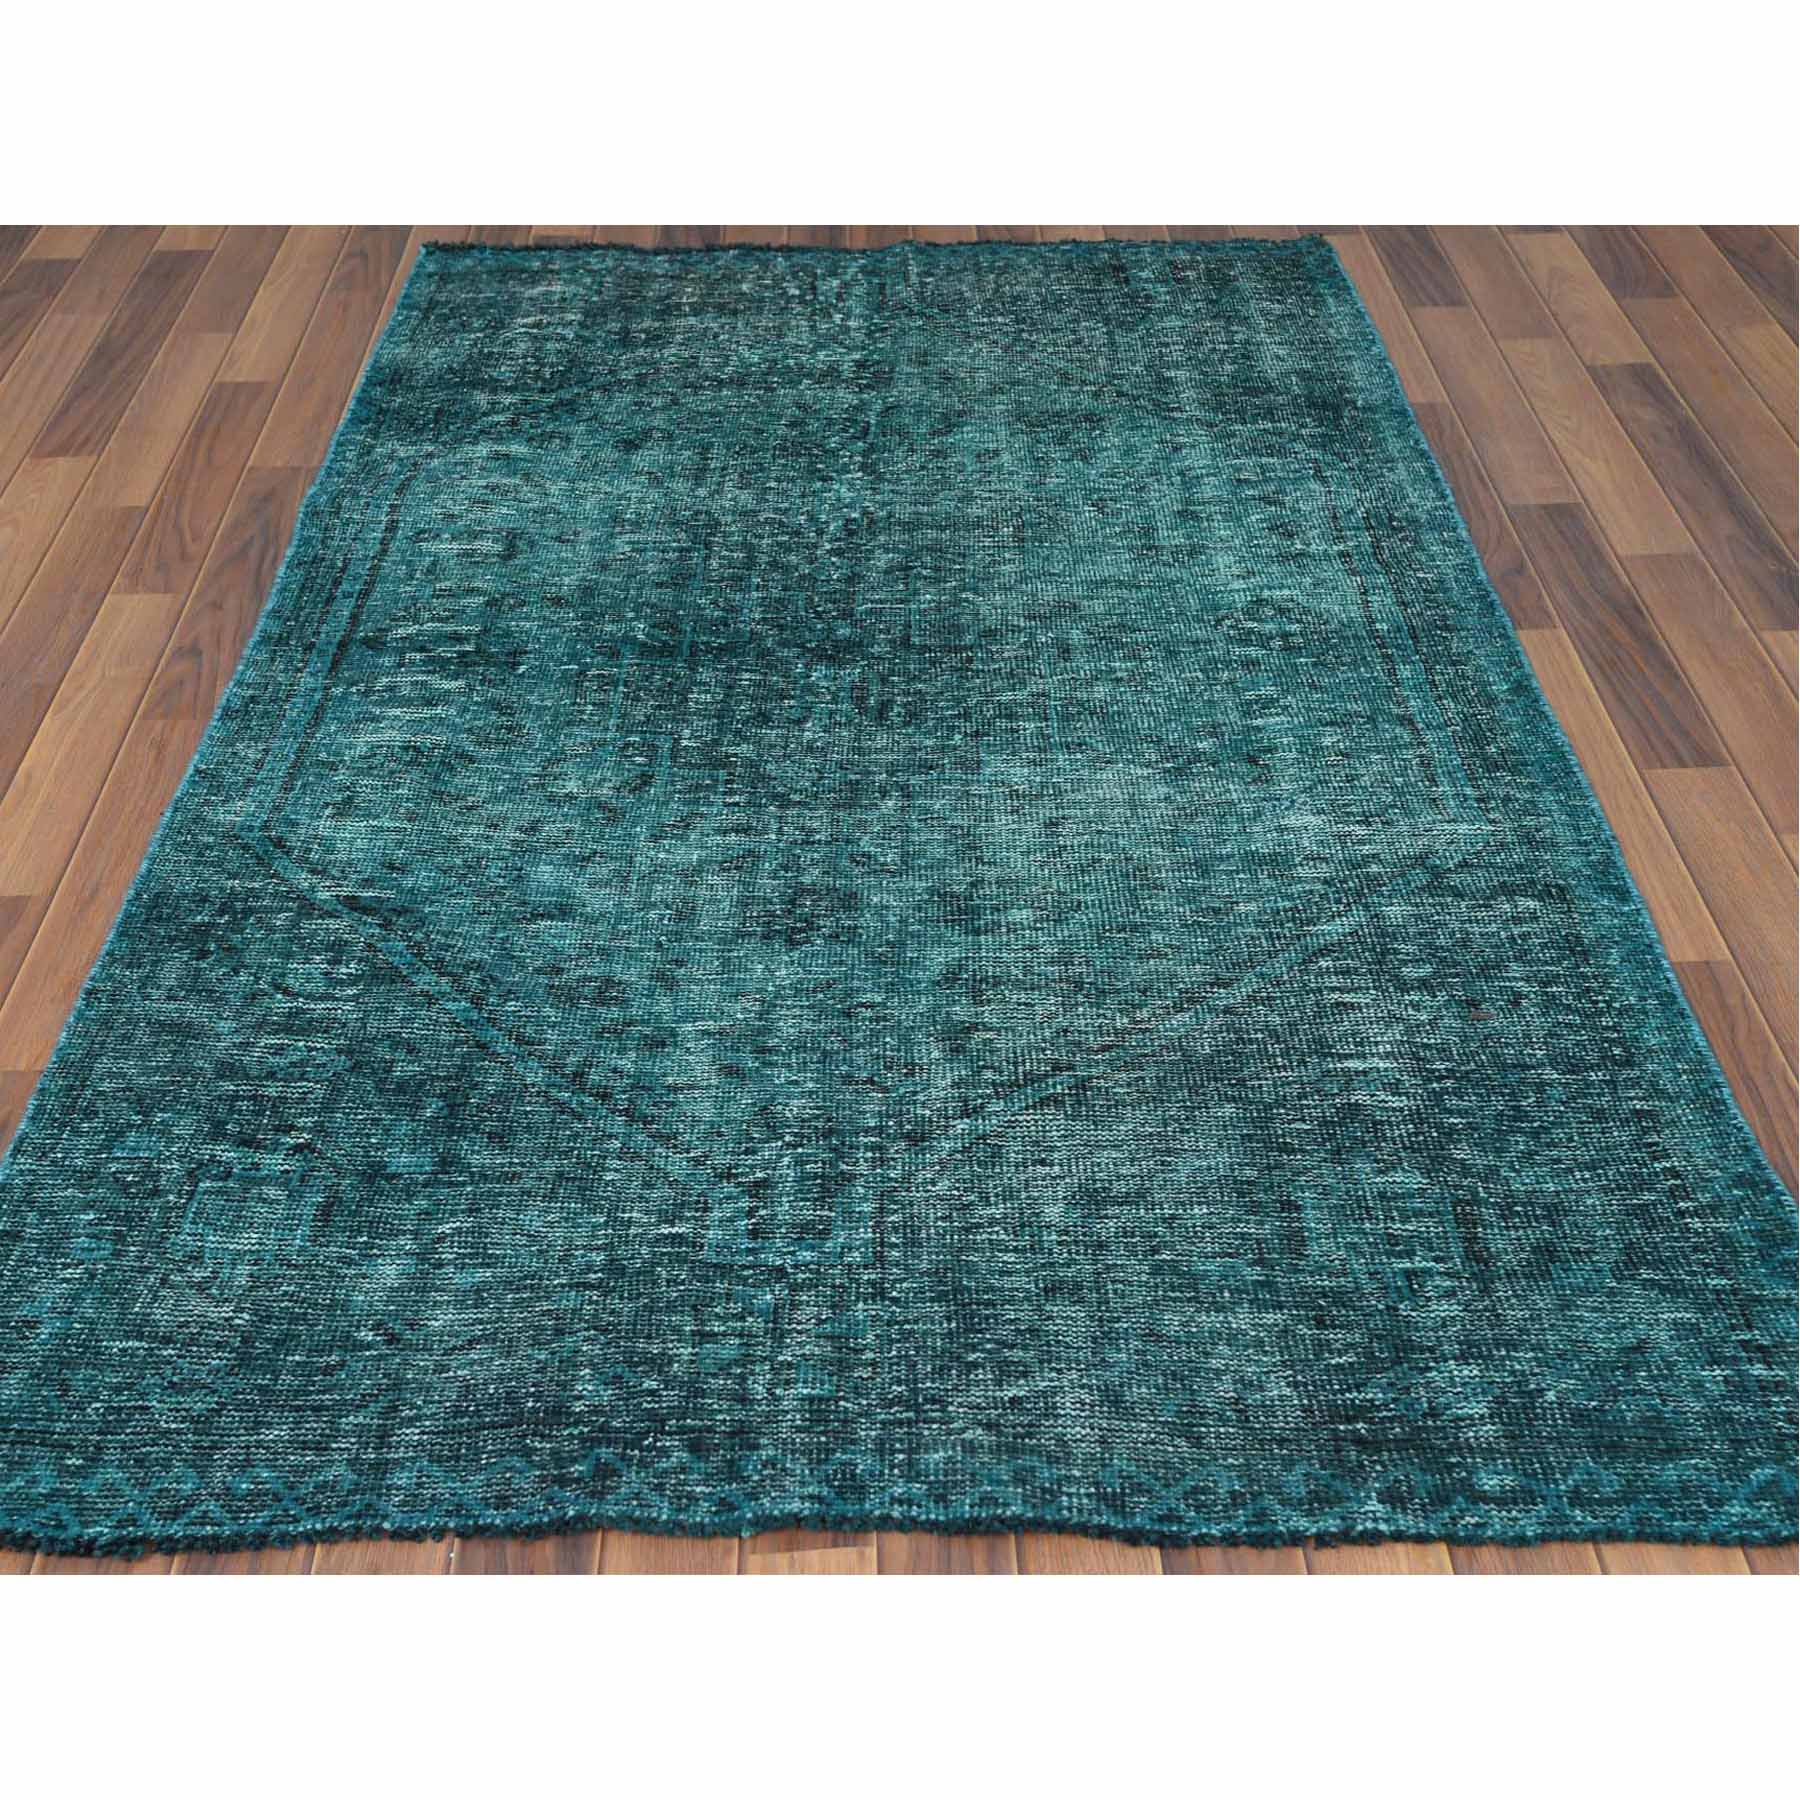 Overdyed-Vintage-Hand-Knotted-Rug-302760